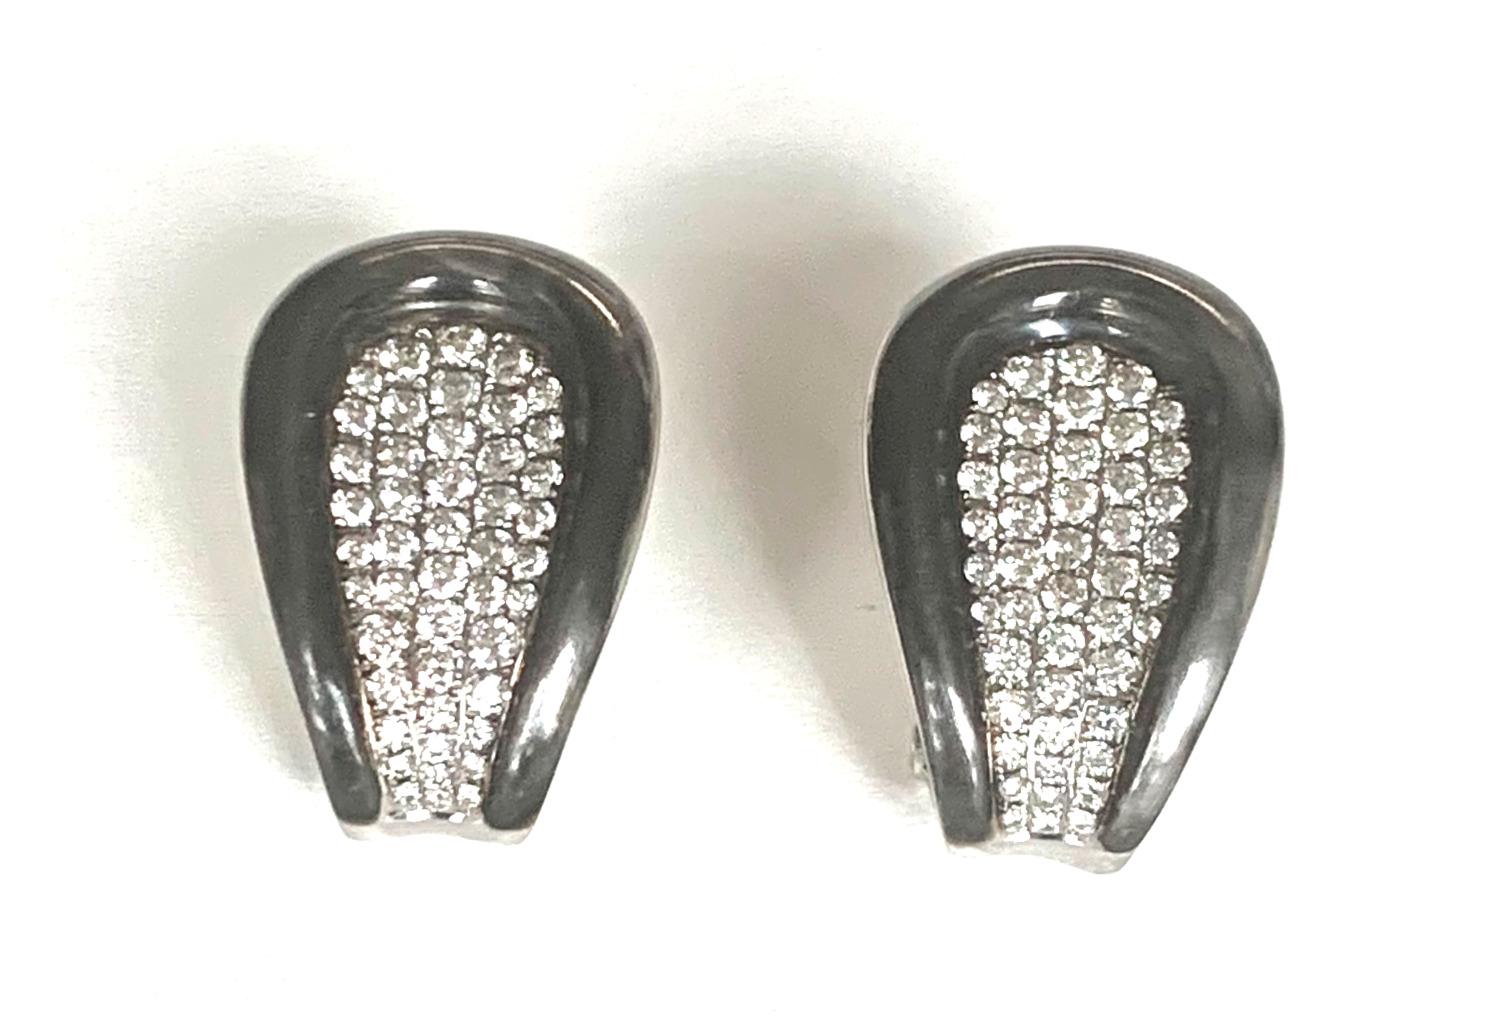 These 18k white gold and diamond-encrusted earrings are a study in contrasts, made with an unusual brushed gunmetal finish border that complements the elegantly pave-set sparkly diamonds. These striking earrings were made in Italy and have a chic,